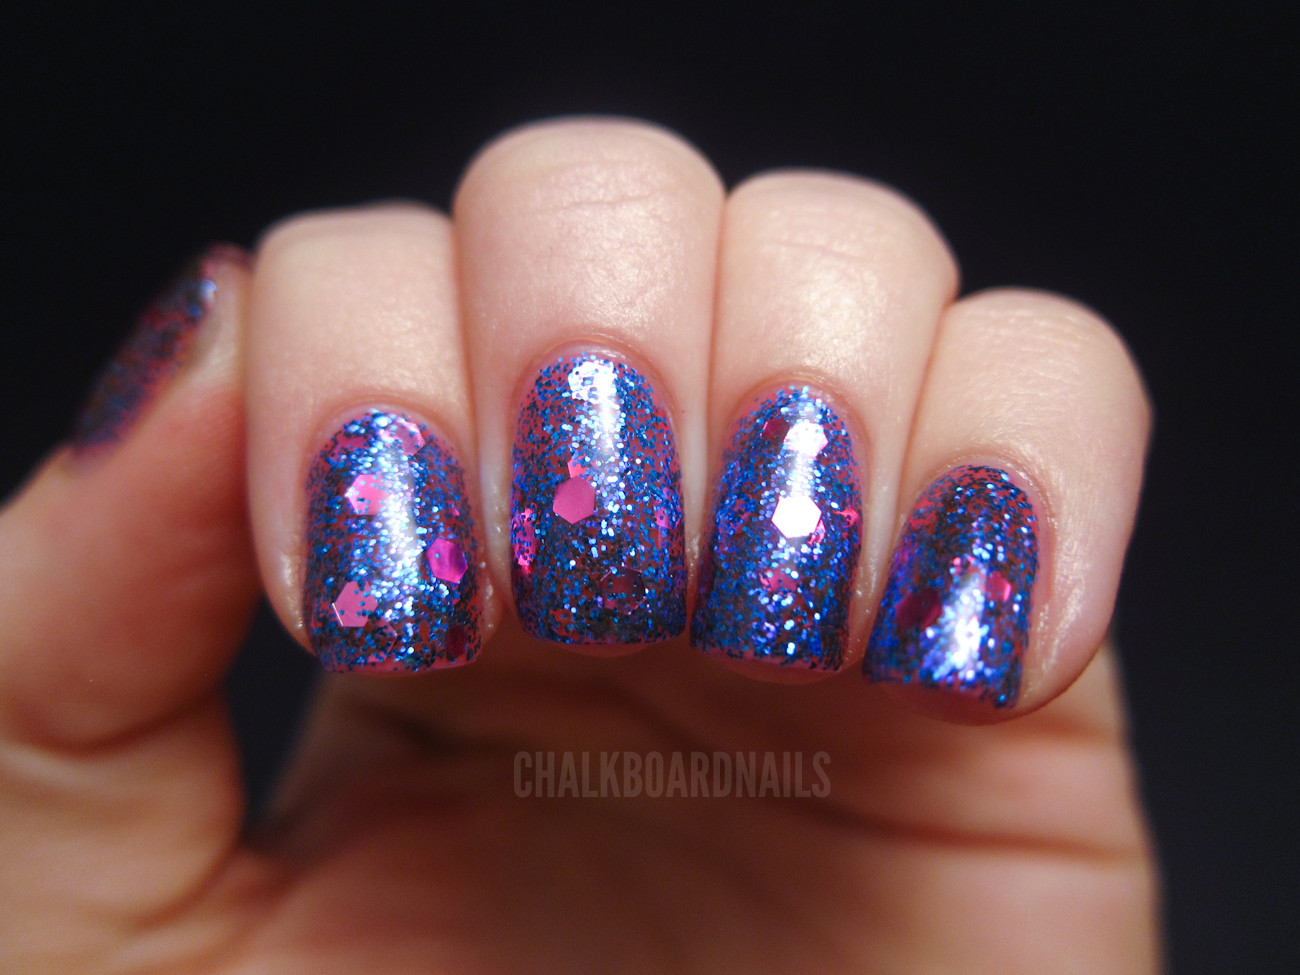 Cotton Candy Nail Designs
 Lacquistry Cotton Candy Chalkboard Nails